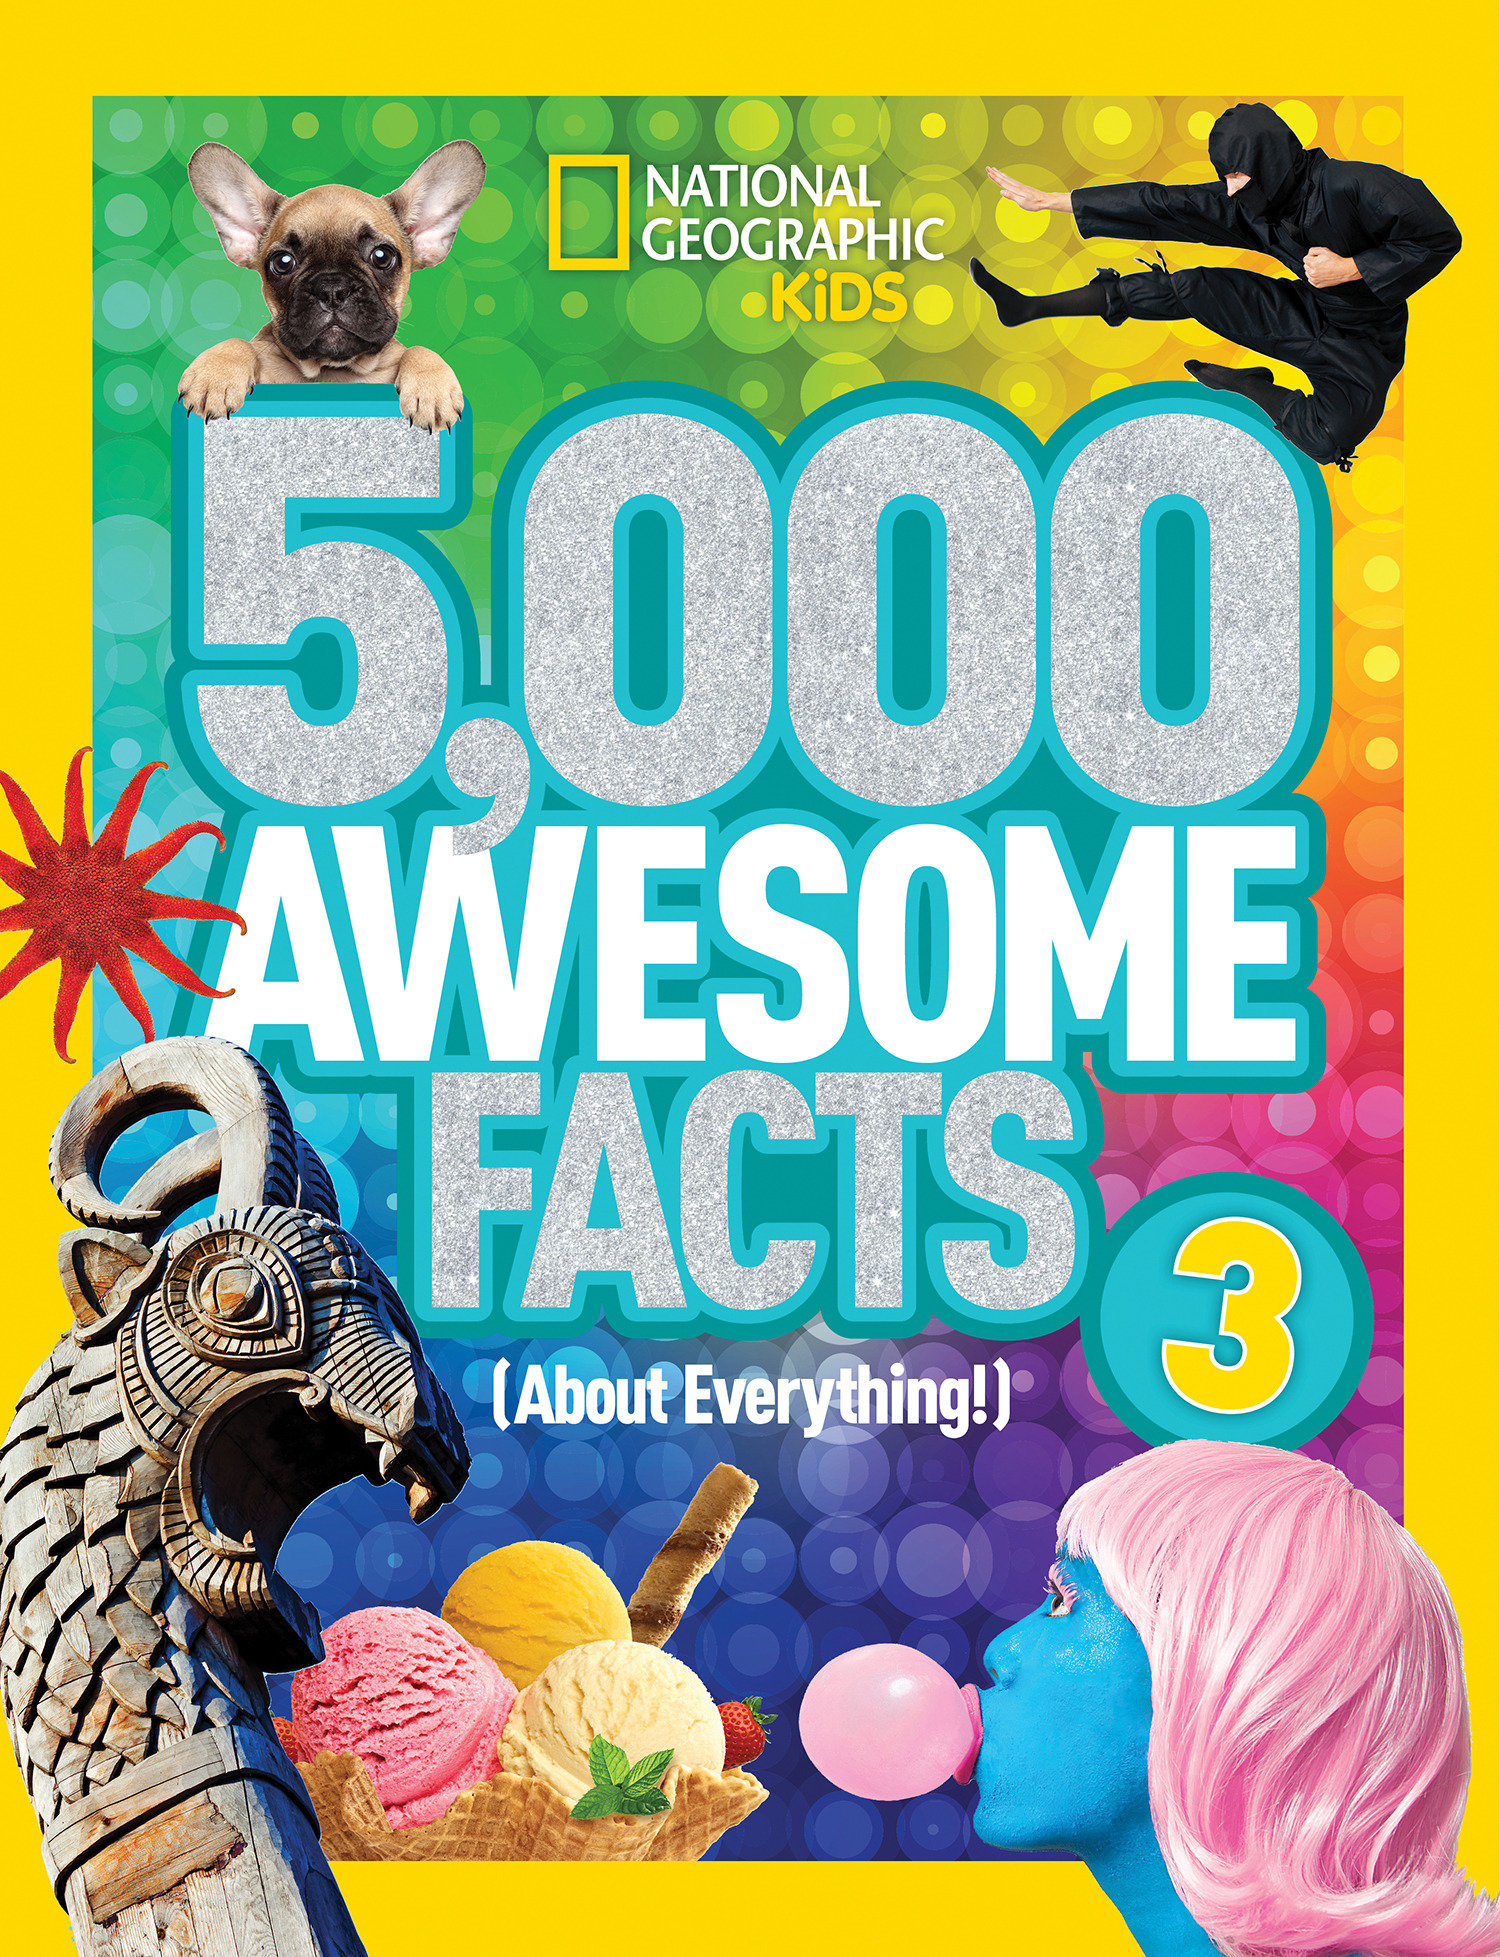 5,000 Awesome Facts (About Everything!) 3 (Hardcover Book)